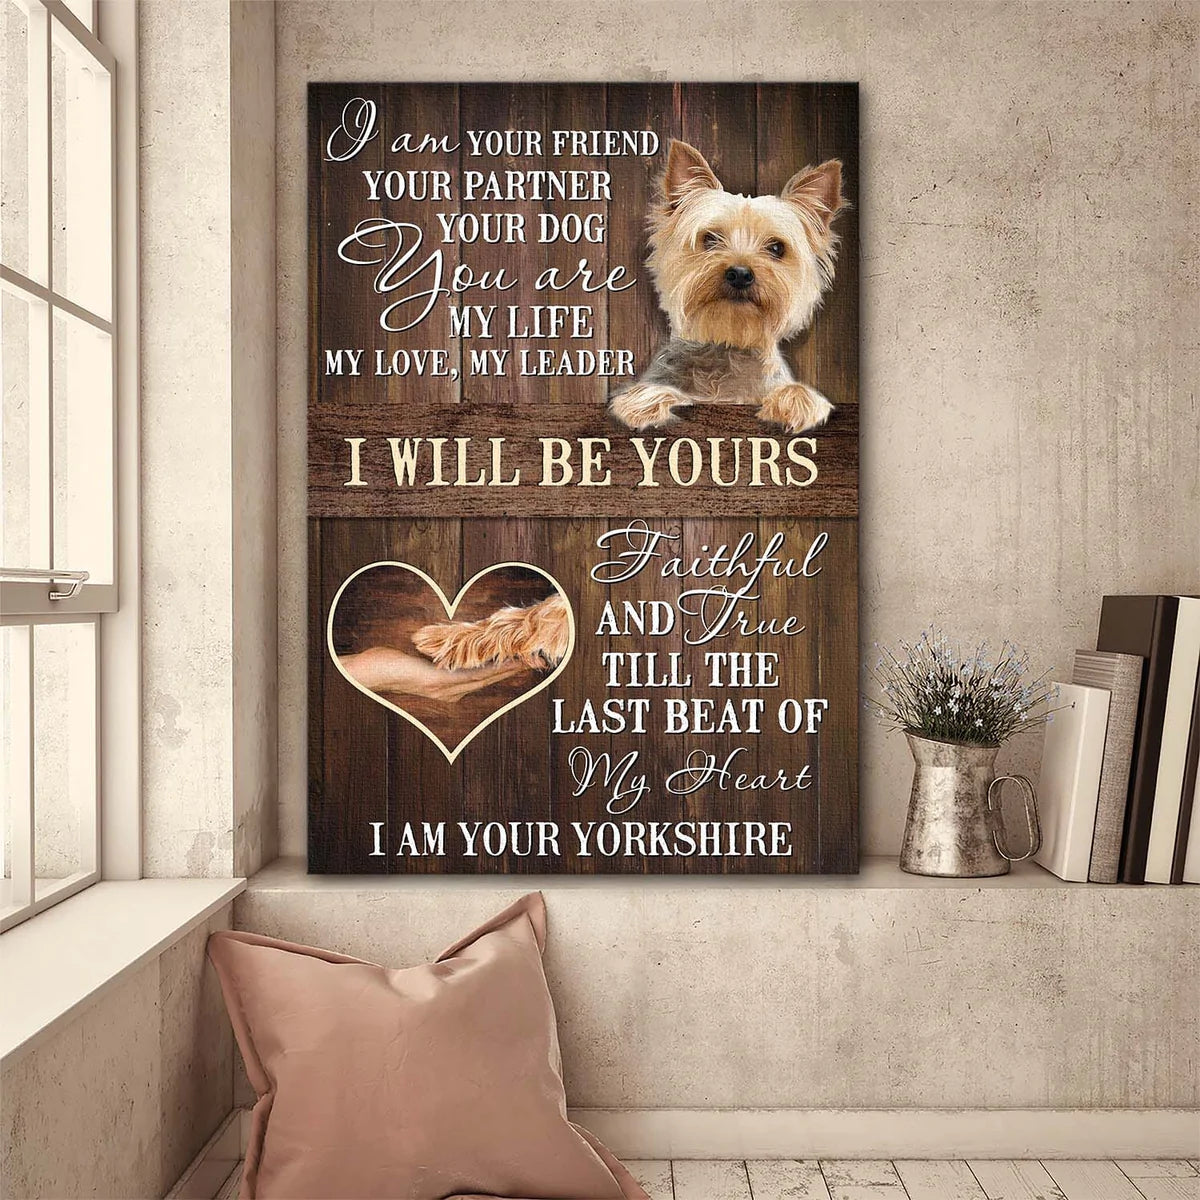 Yorkshire Terrier Dog Portrait Canvas - Yorkshire Terrier, Dog Picture Canvas - Gift for Yorkshire Terrier, Dog Lovers - I Will Be Yours Dog